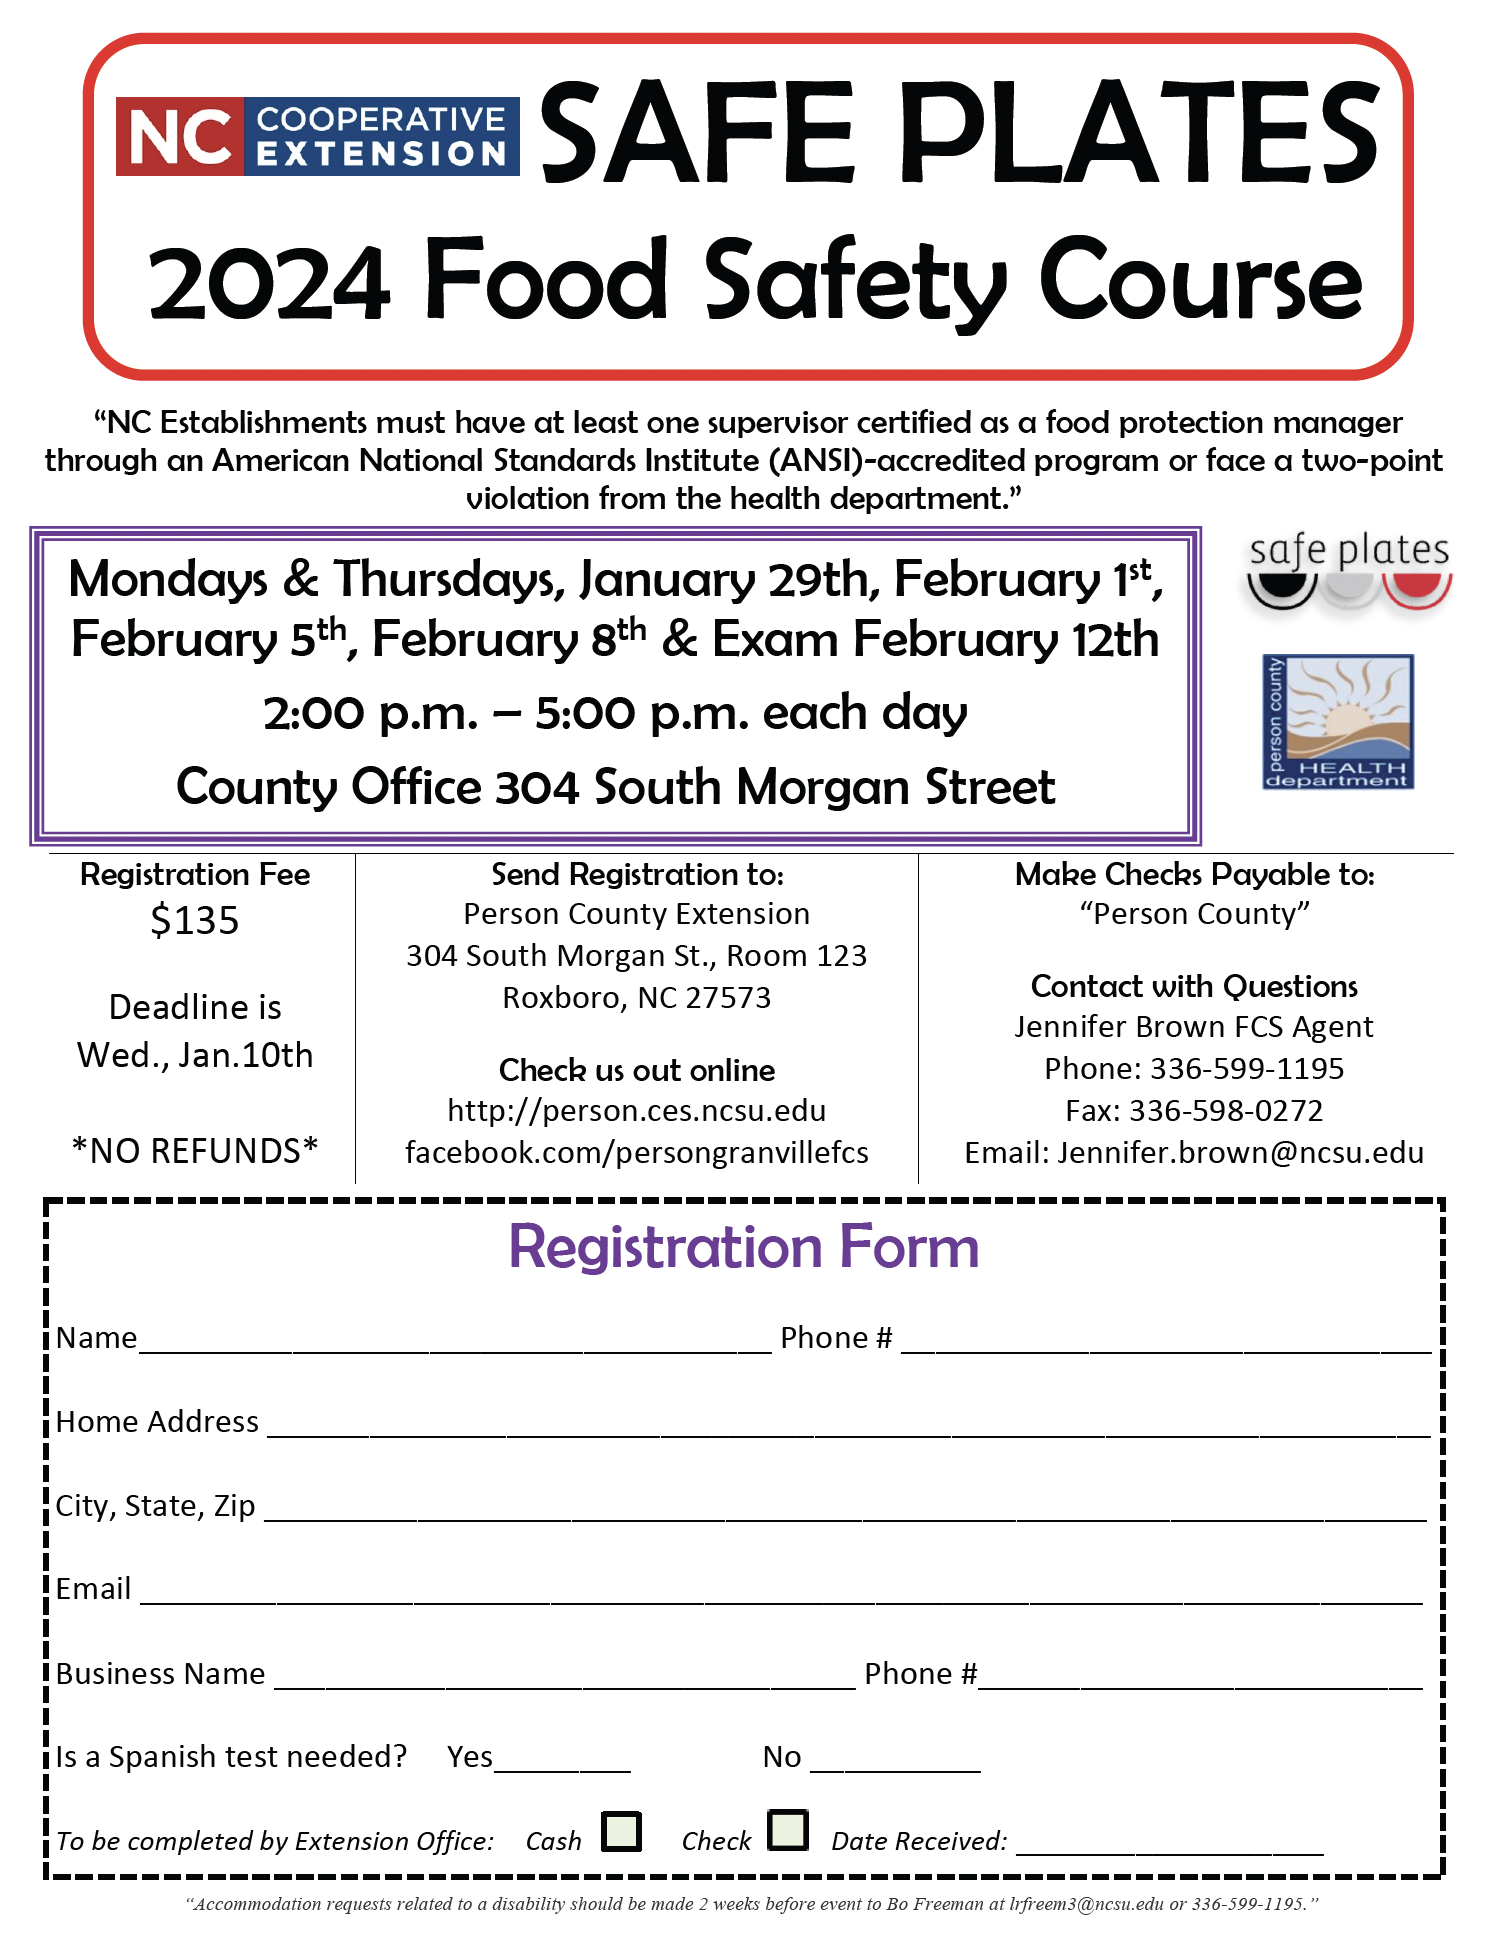 Food Safety Course Flier